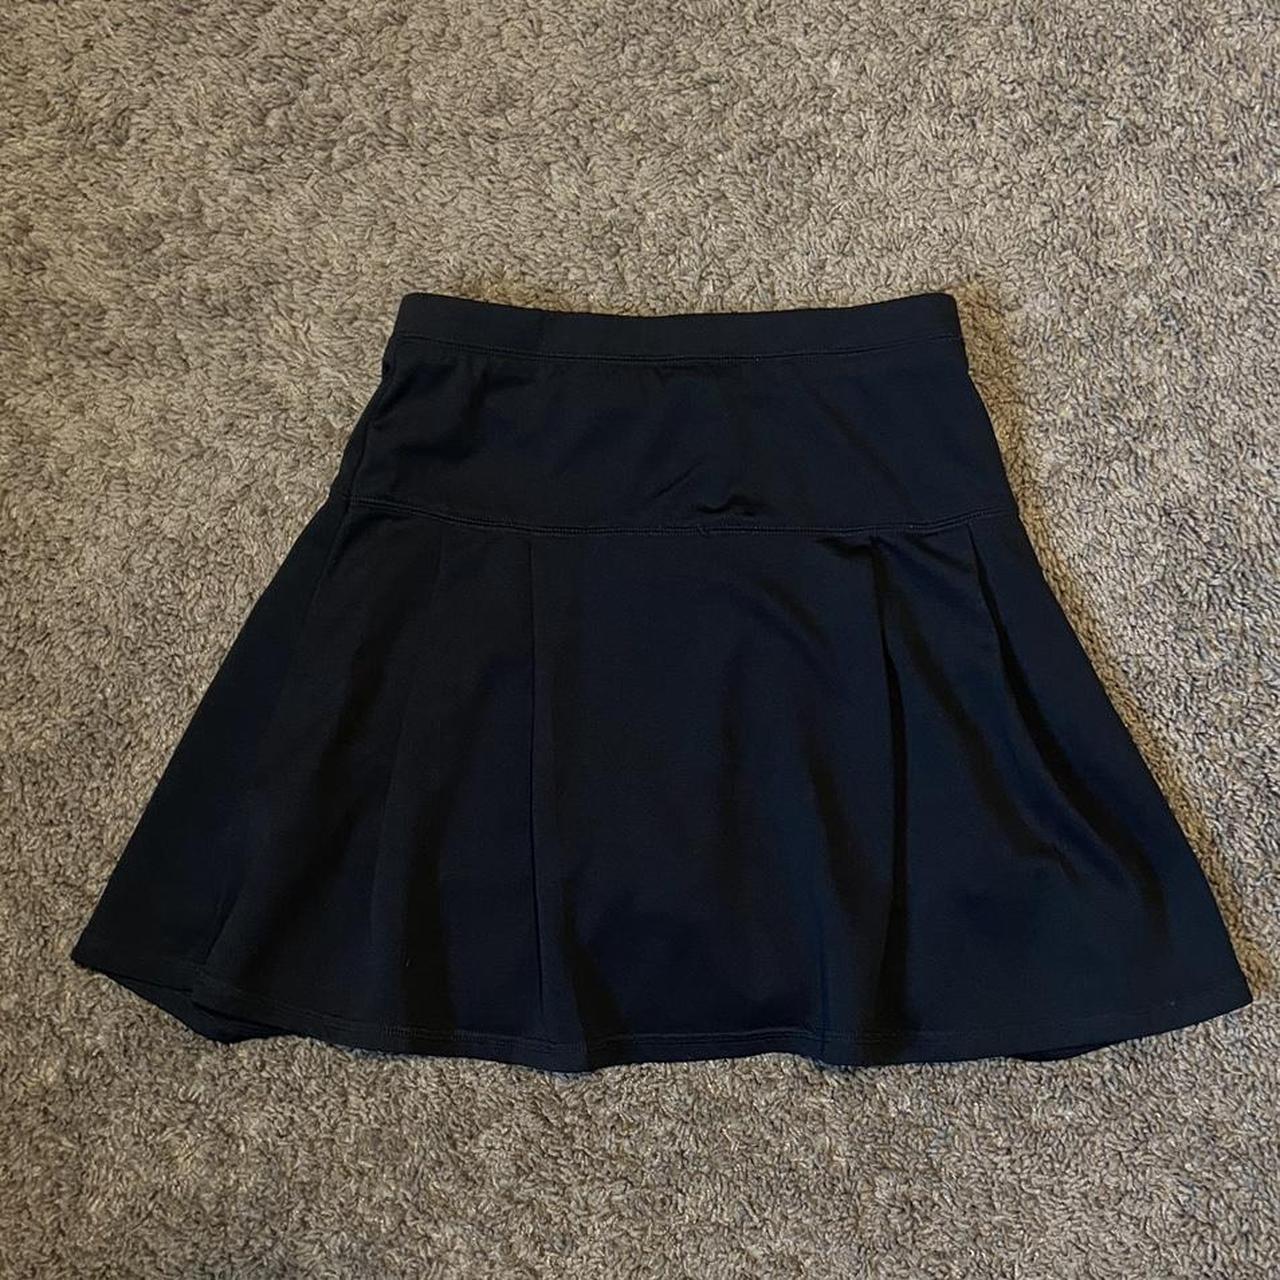 CHAPS skirt with shorts Women’s size 14 navy blue... - Depop